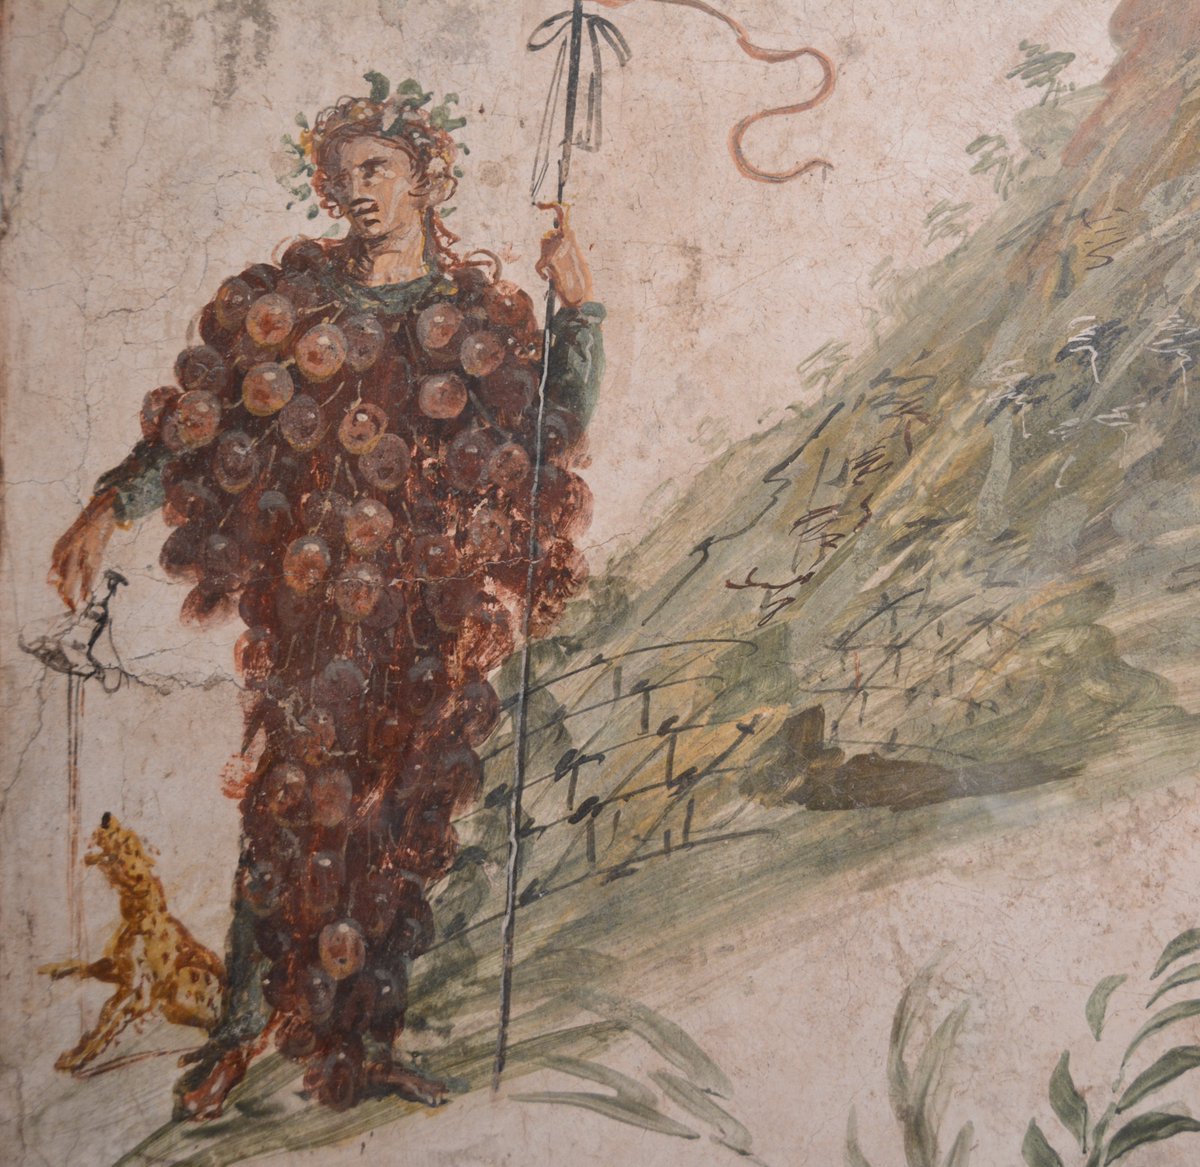 The stake holes would have supported a wooden frame along which the vine grew. This structure was documented by the ancient authors & called ‘vitis compluviata’ as it resembled the opening in the roof of an atrium in a house and appears in this fresco on the slopes of Vesuvius